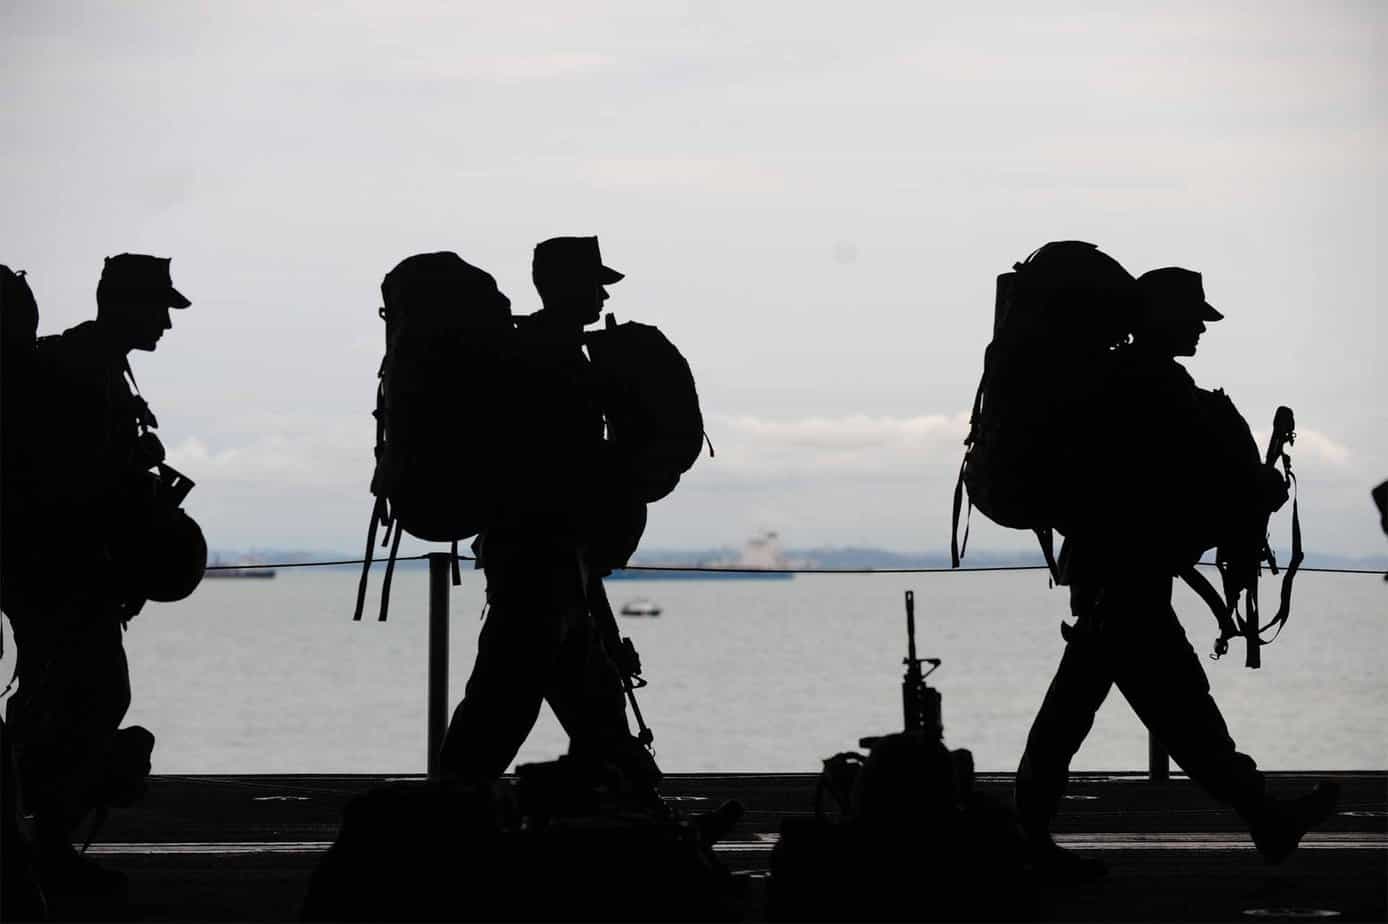 silhouette of military soldiers standing next to large body of water